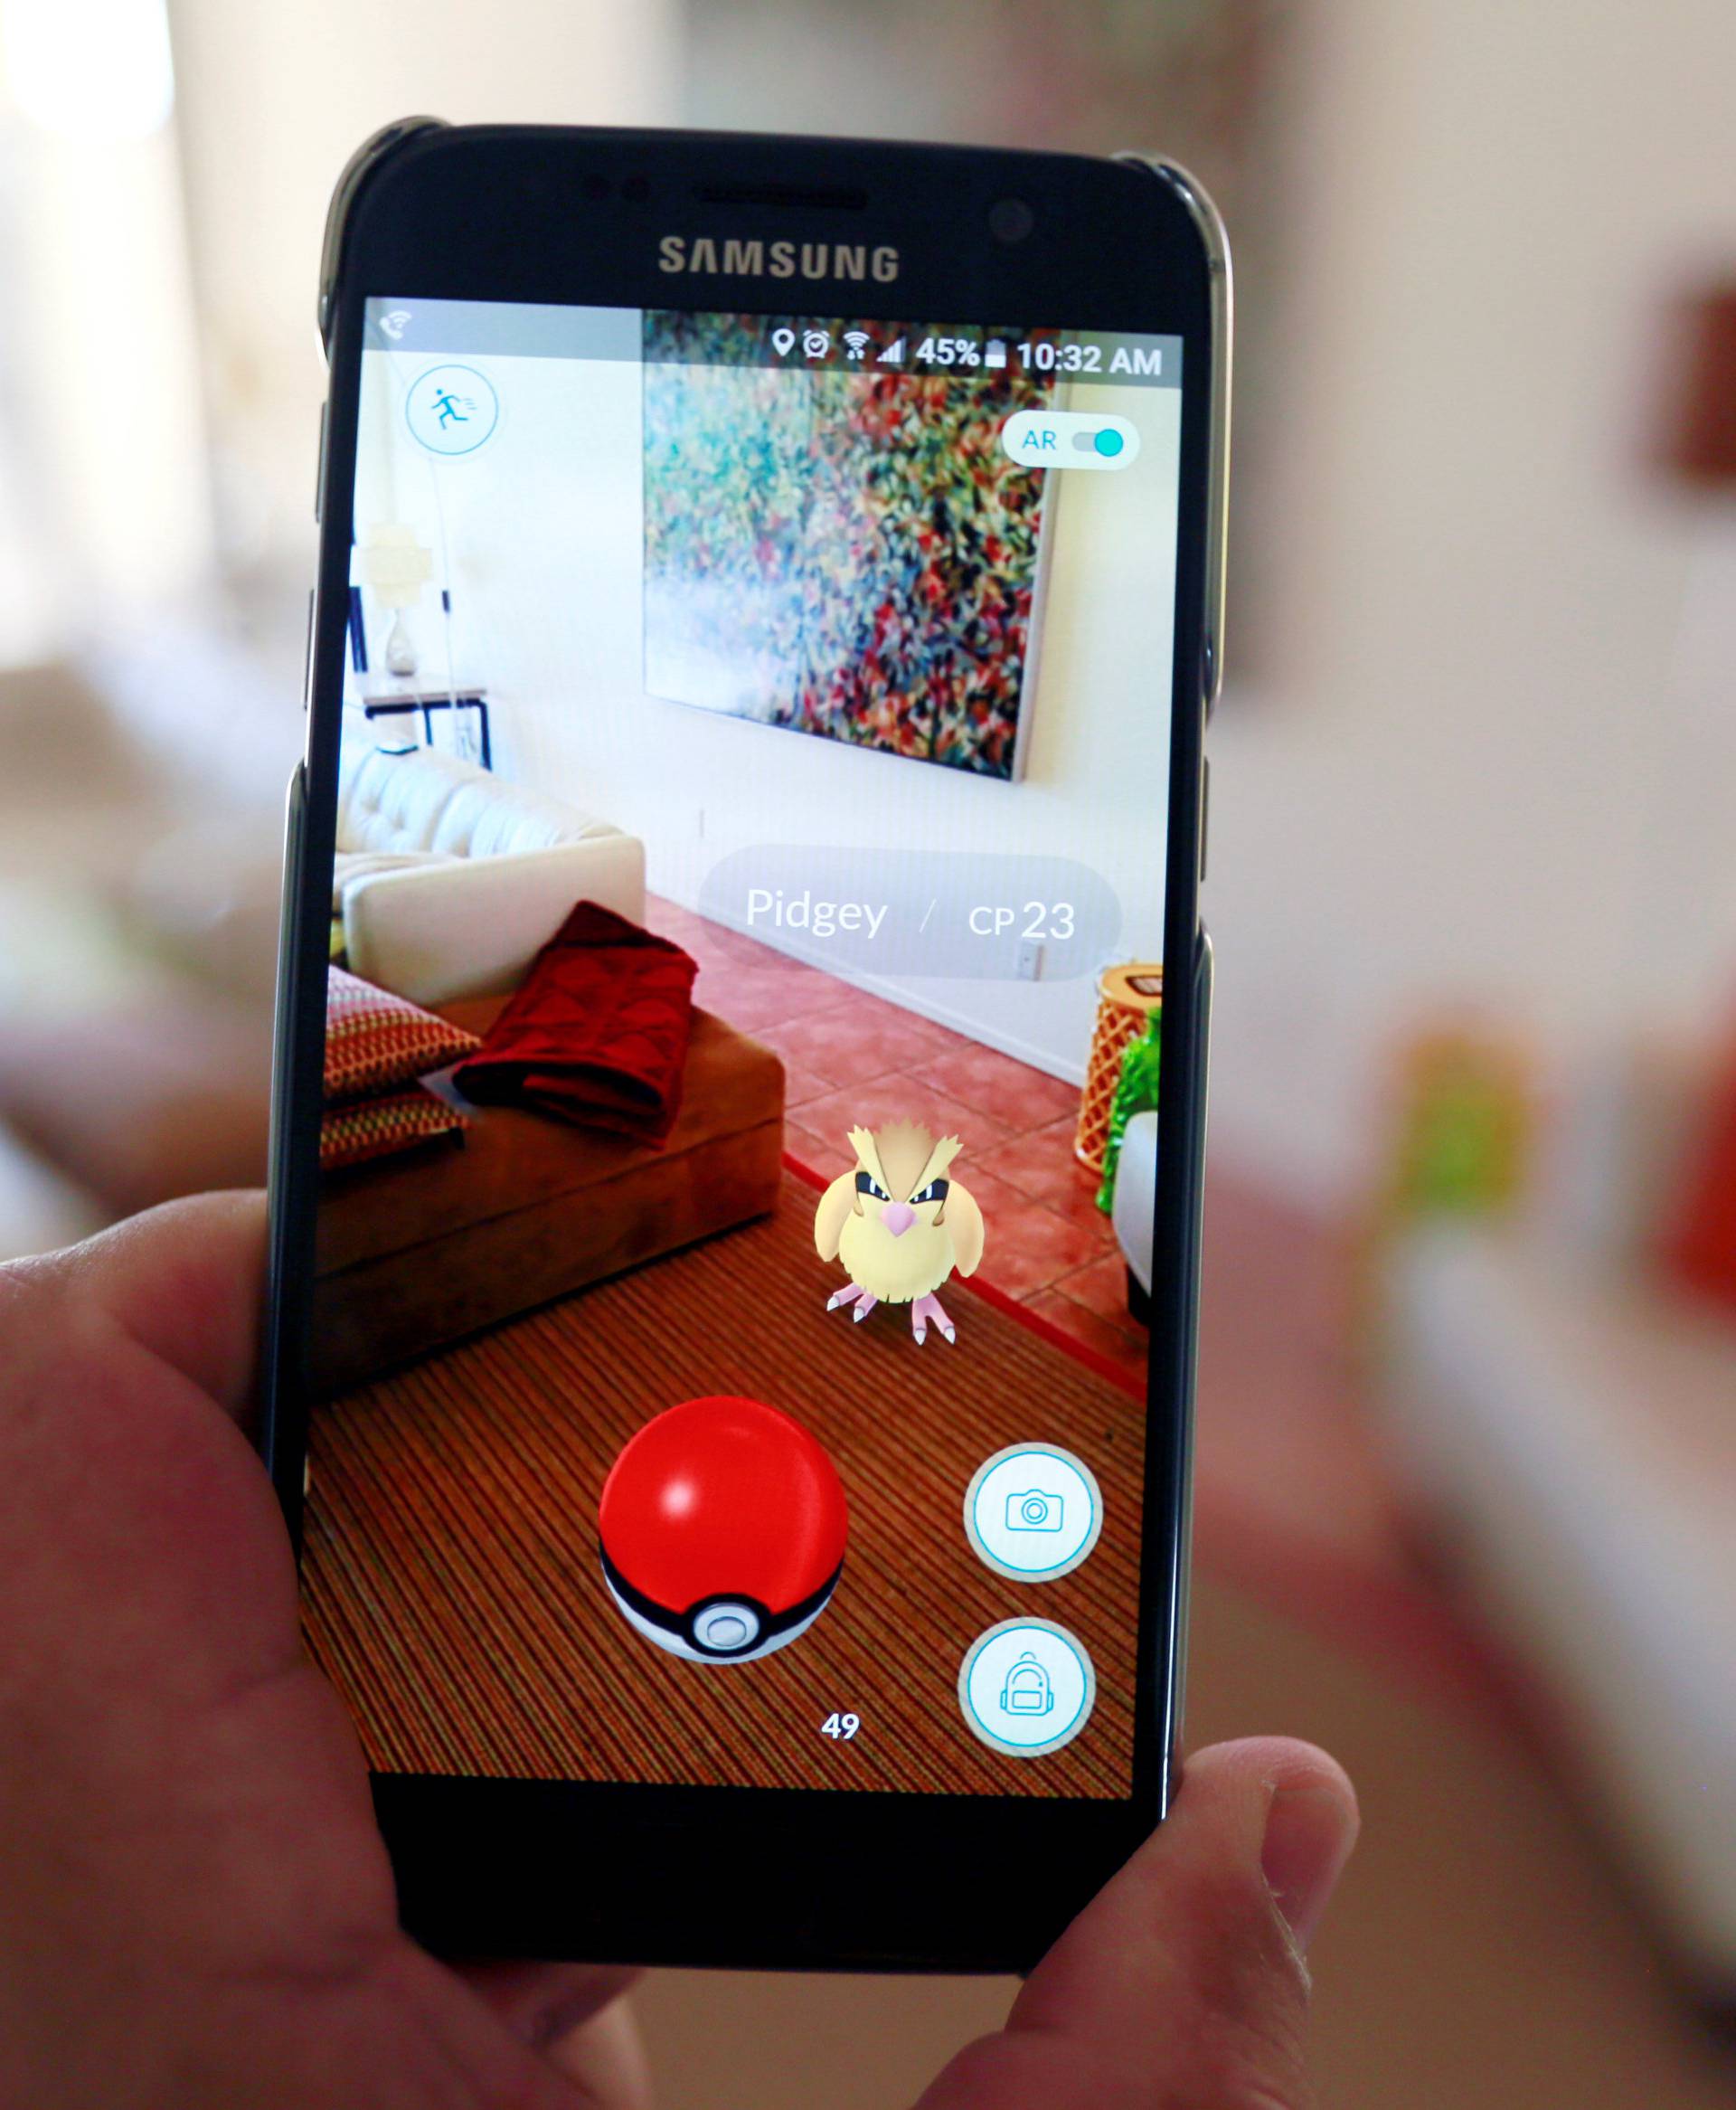 Illustration of the augmented reality mobile game "Pokemon Go"